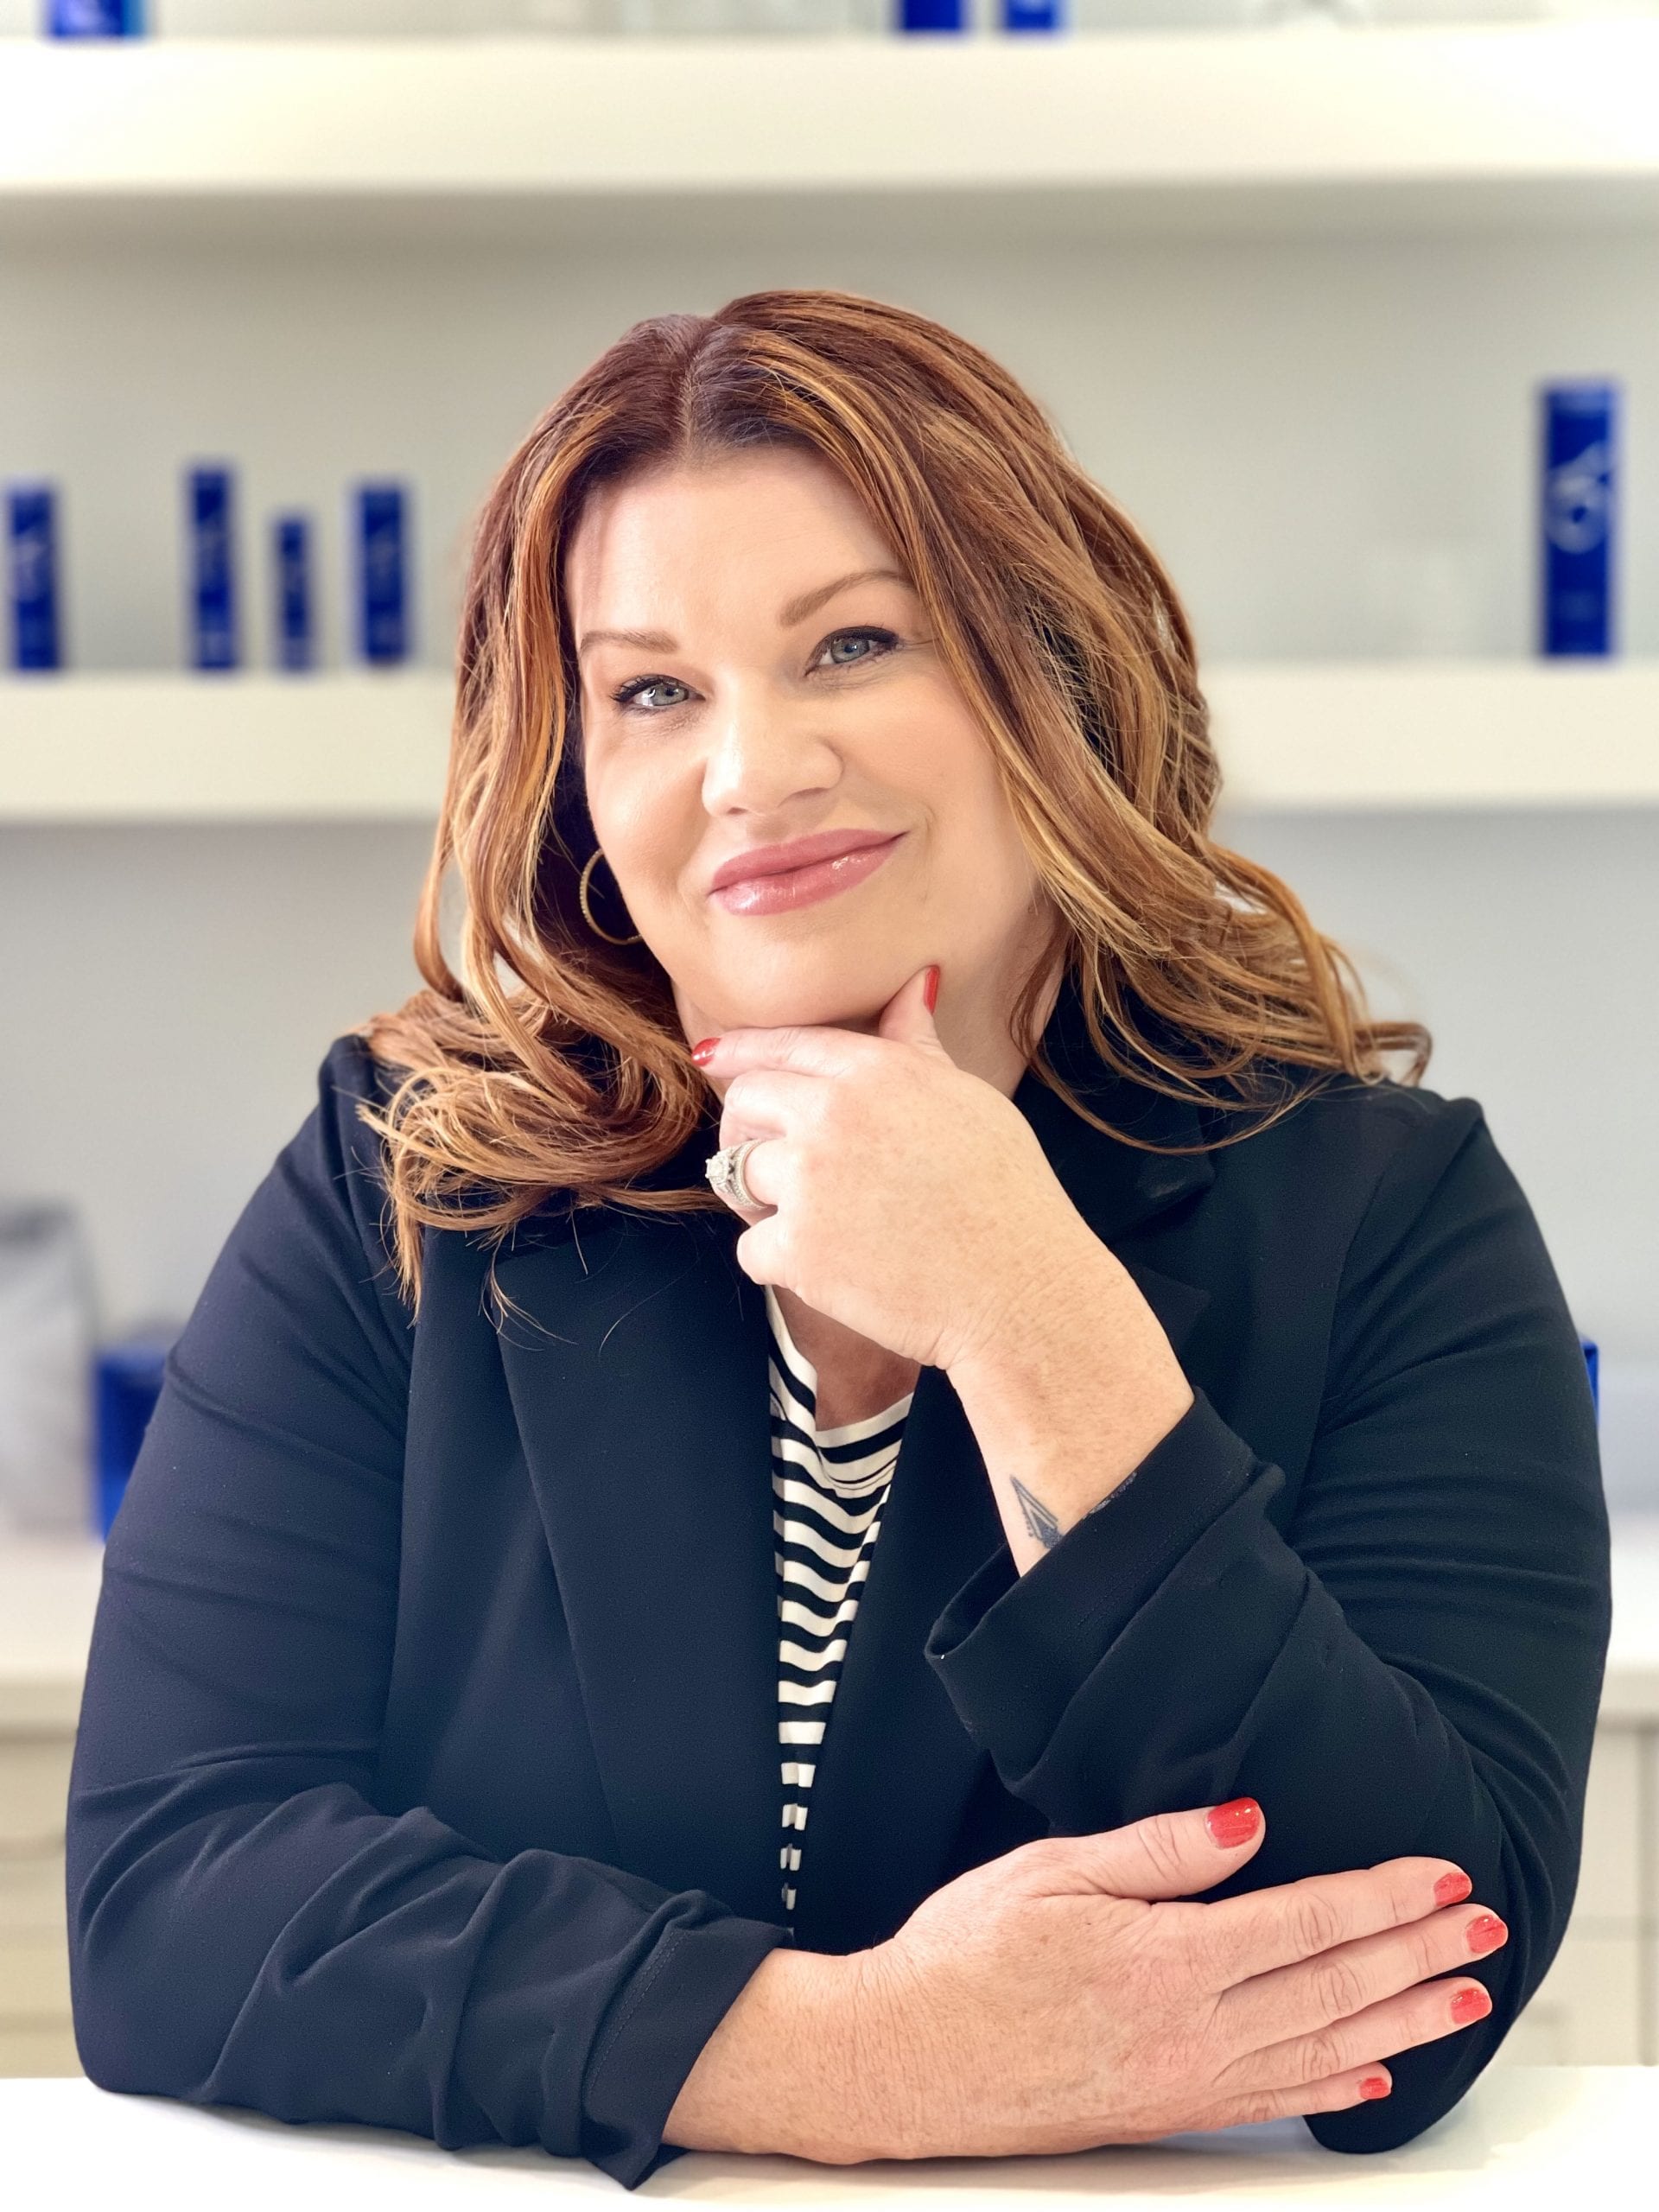 Licensed Medical Aesthetician - works with coolsculpting and skincare like juvederm, facial filler, botox | Murfreesboro, TN